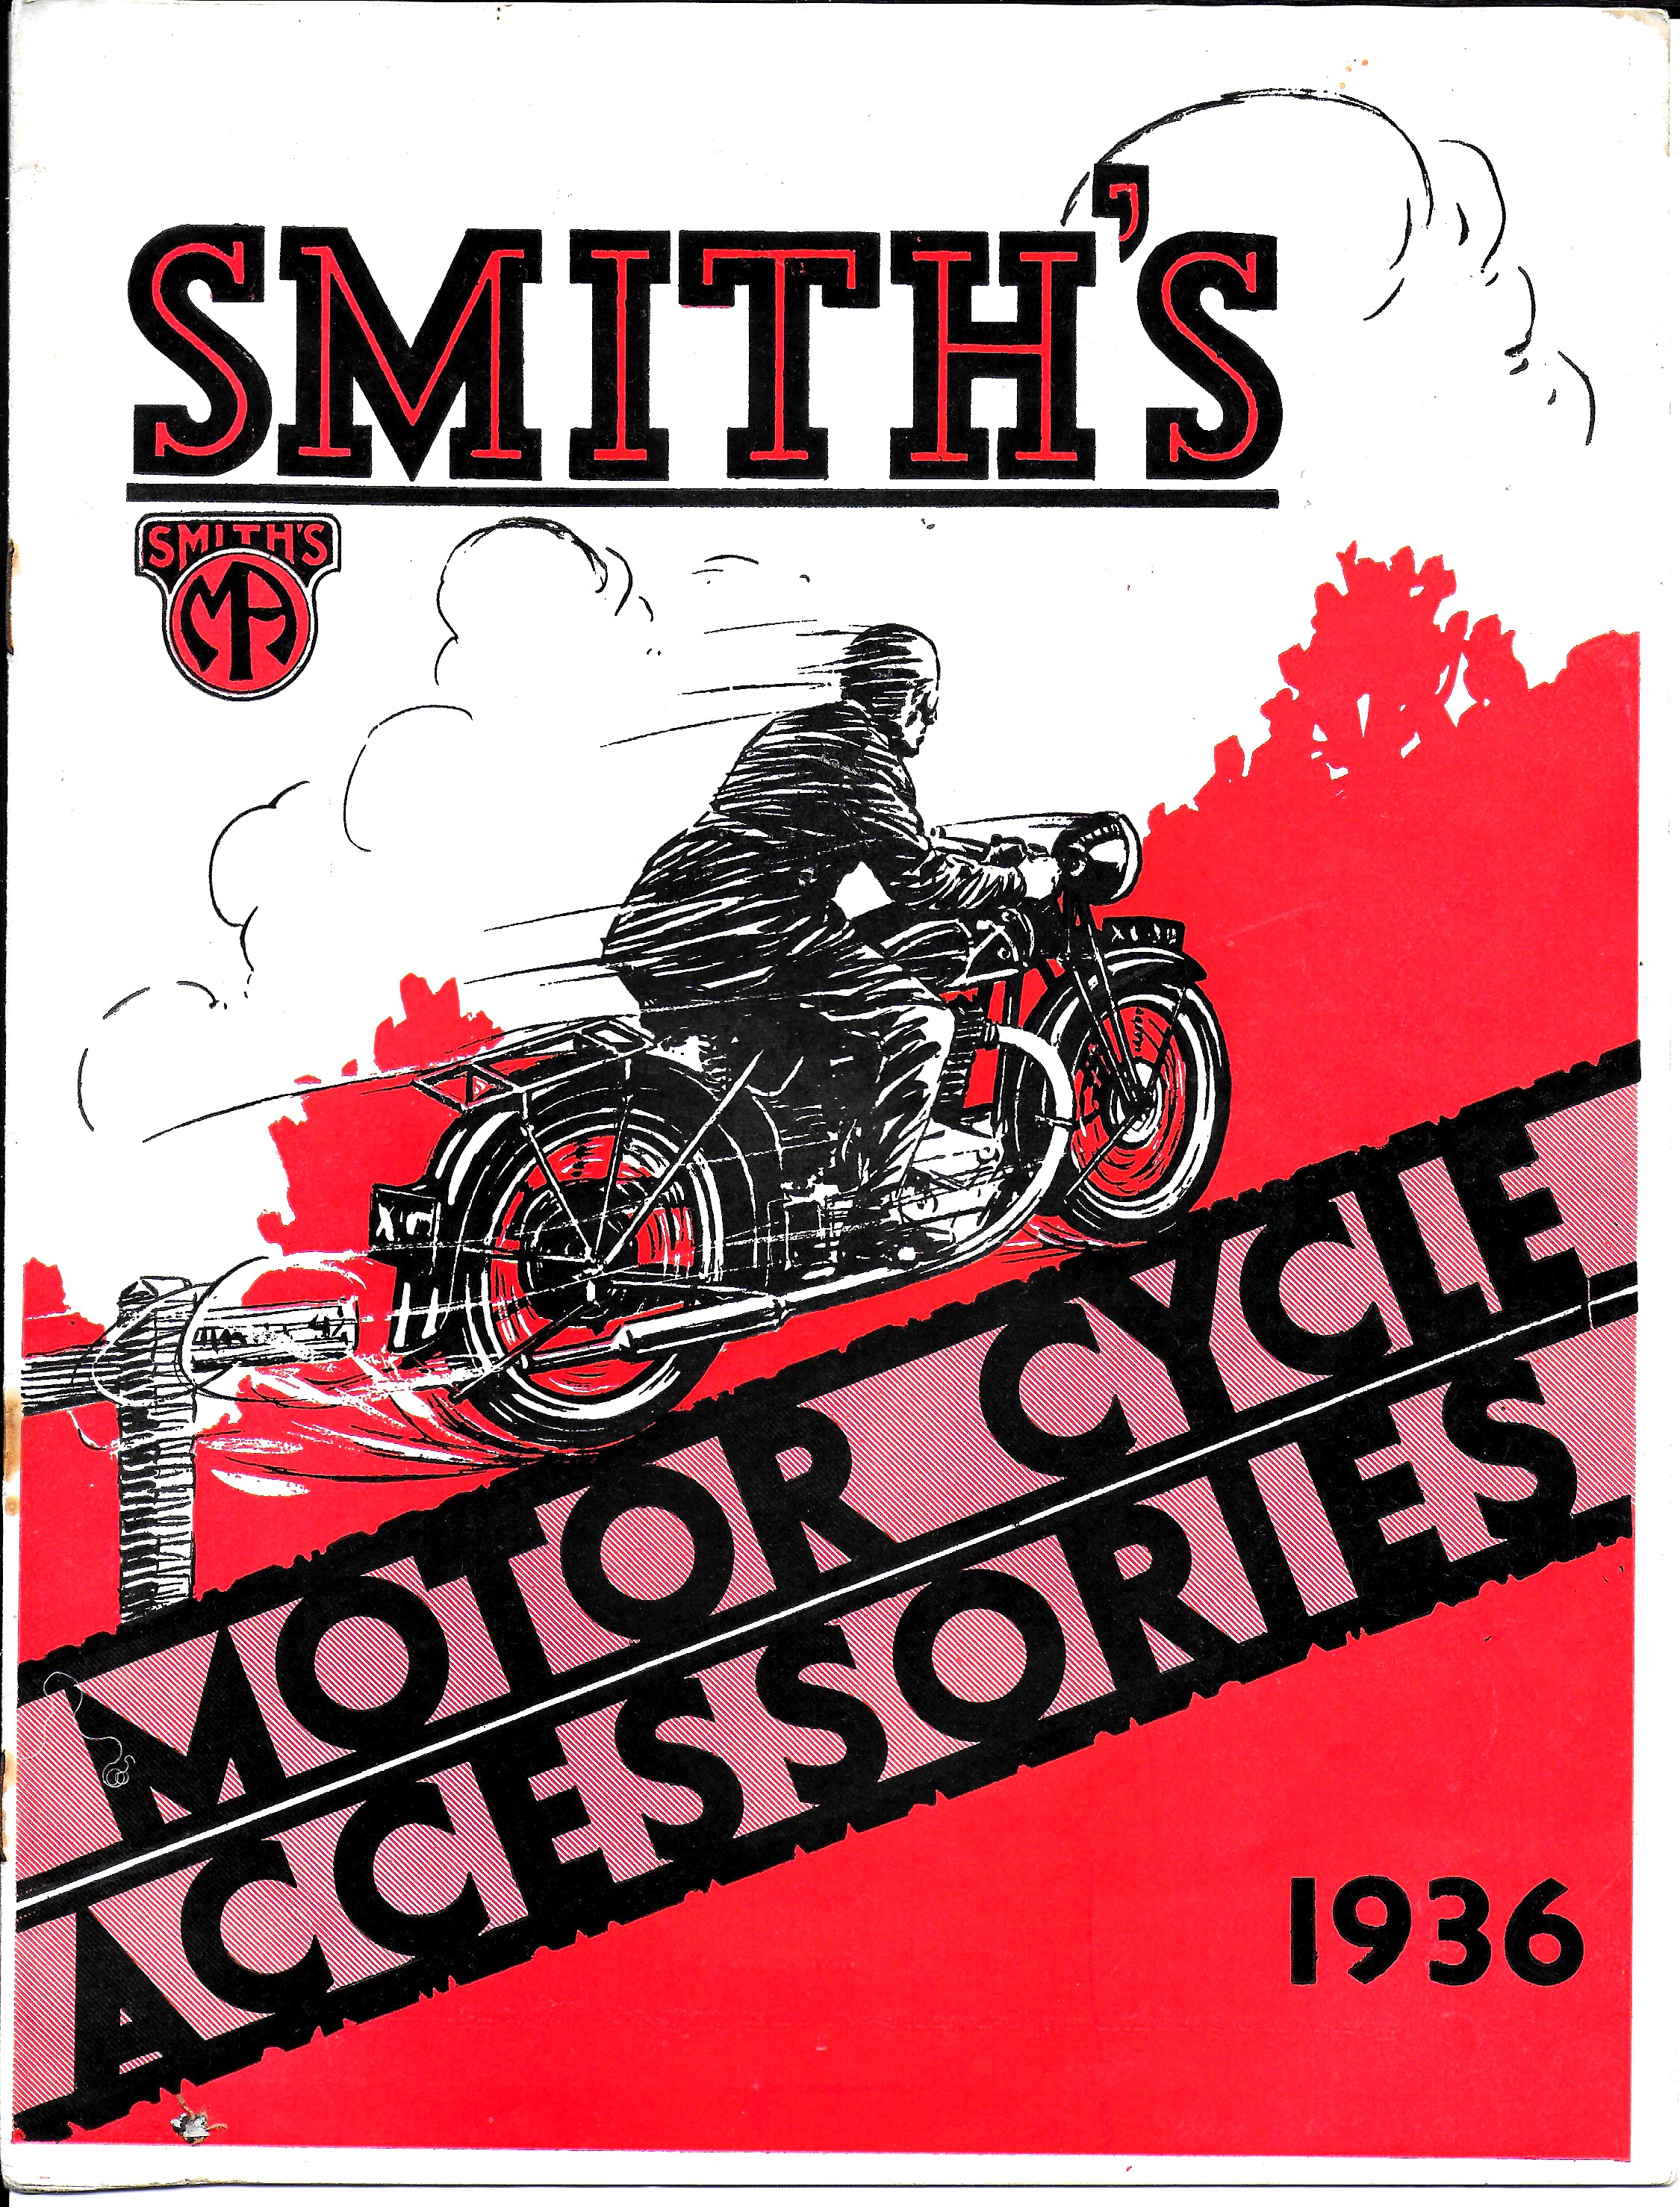 Smiths Motorcycle accessories catalogue 1936